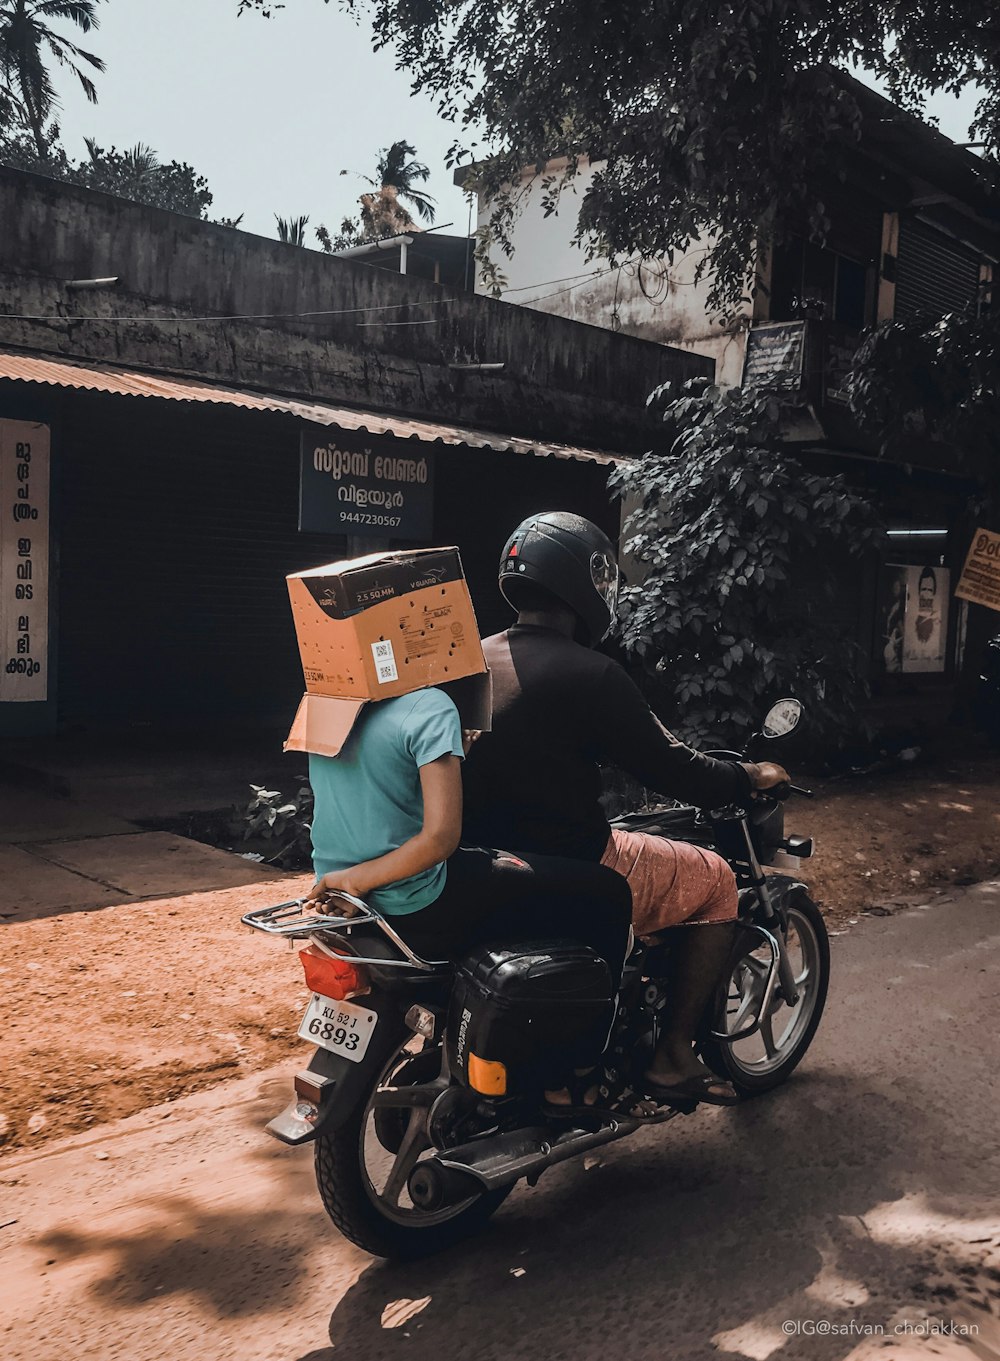 man riding motorcycle with person on his back with box on head